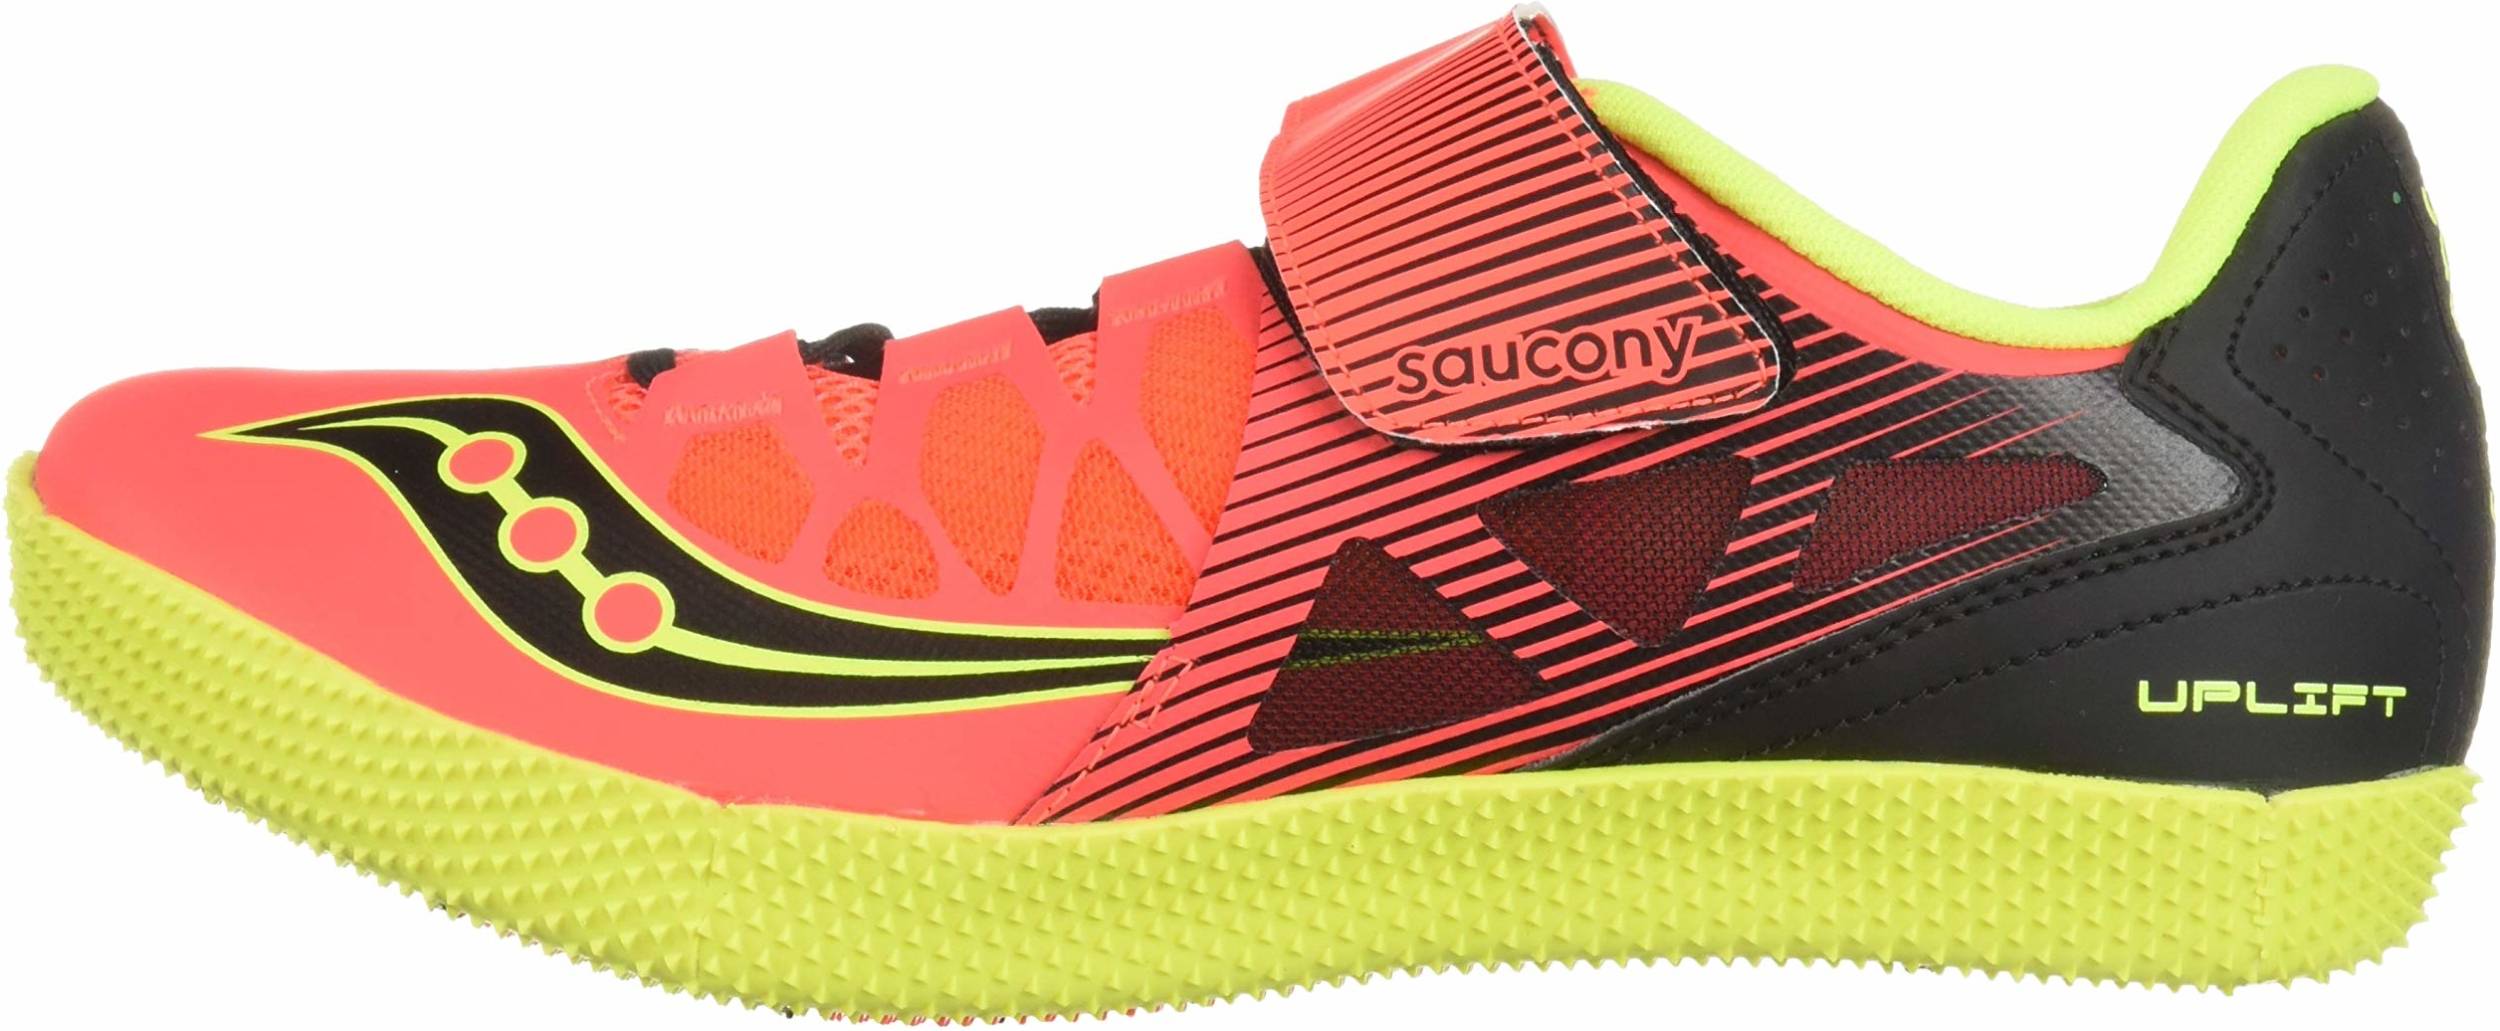 saucony high jump shoes